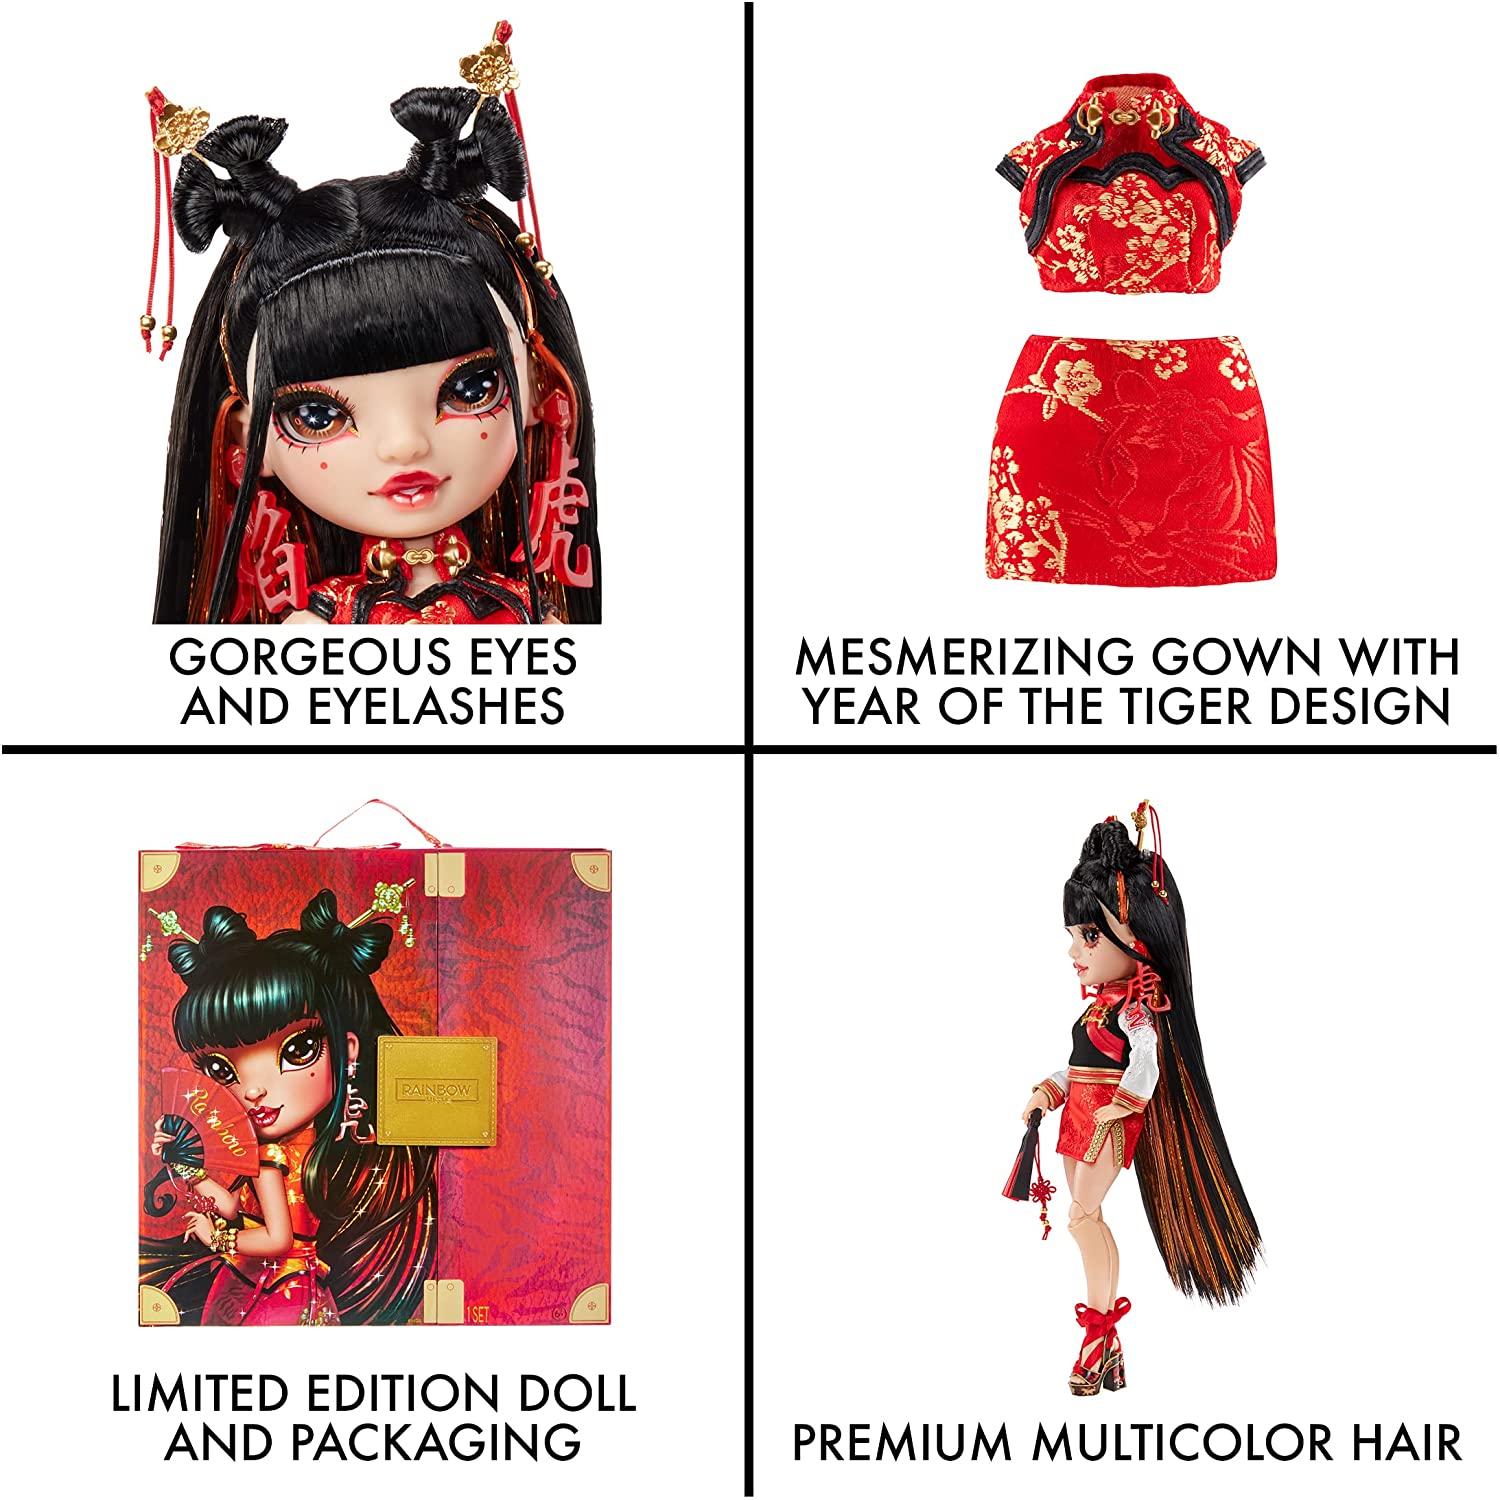 Multicolor Rainbow High Chinese New Year Collector Doll 2 Gorgeous Outfits to Mix & Match and Premium Doll Accessories - 2022 Year of The Tiger Lily Cheng with Multicolored Rainbow Hair 11-inch 